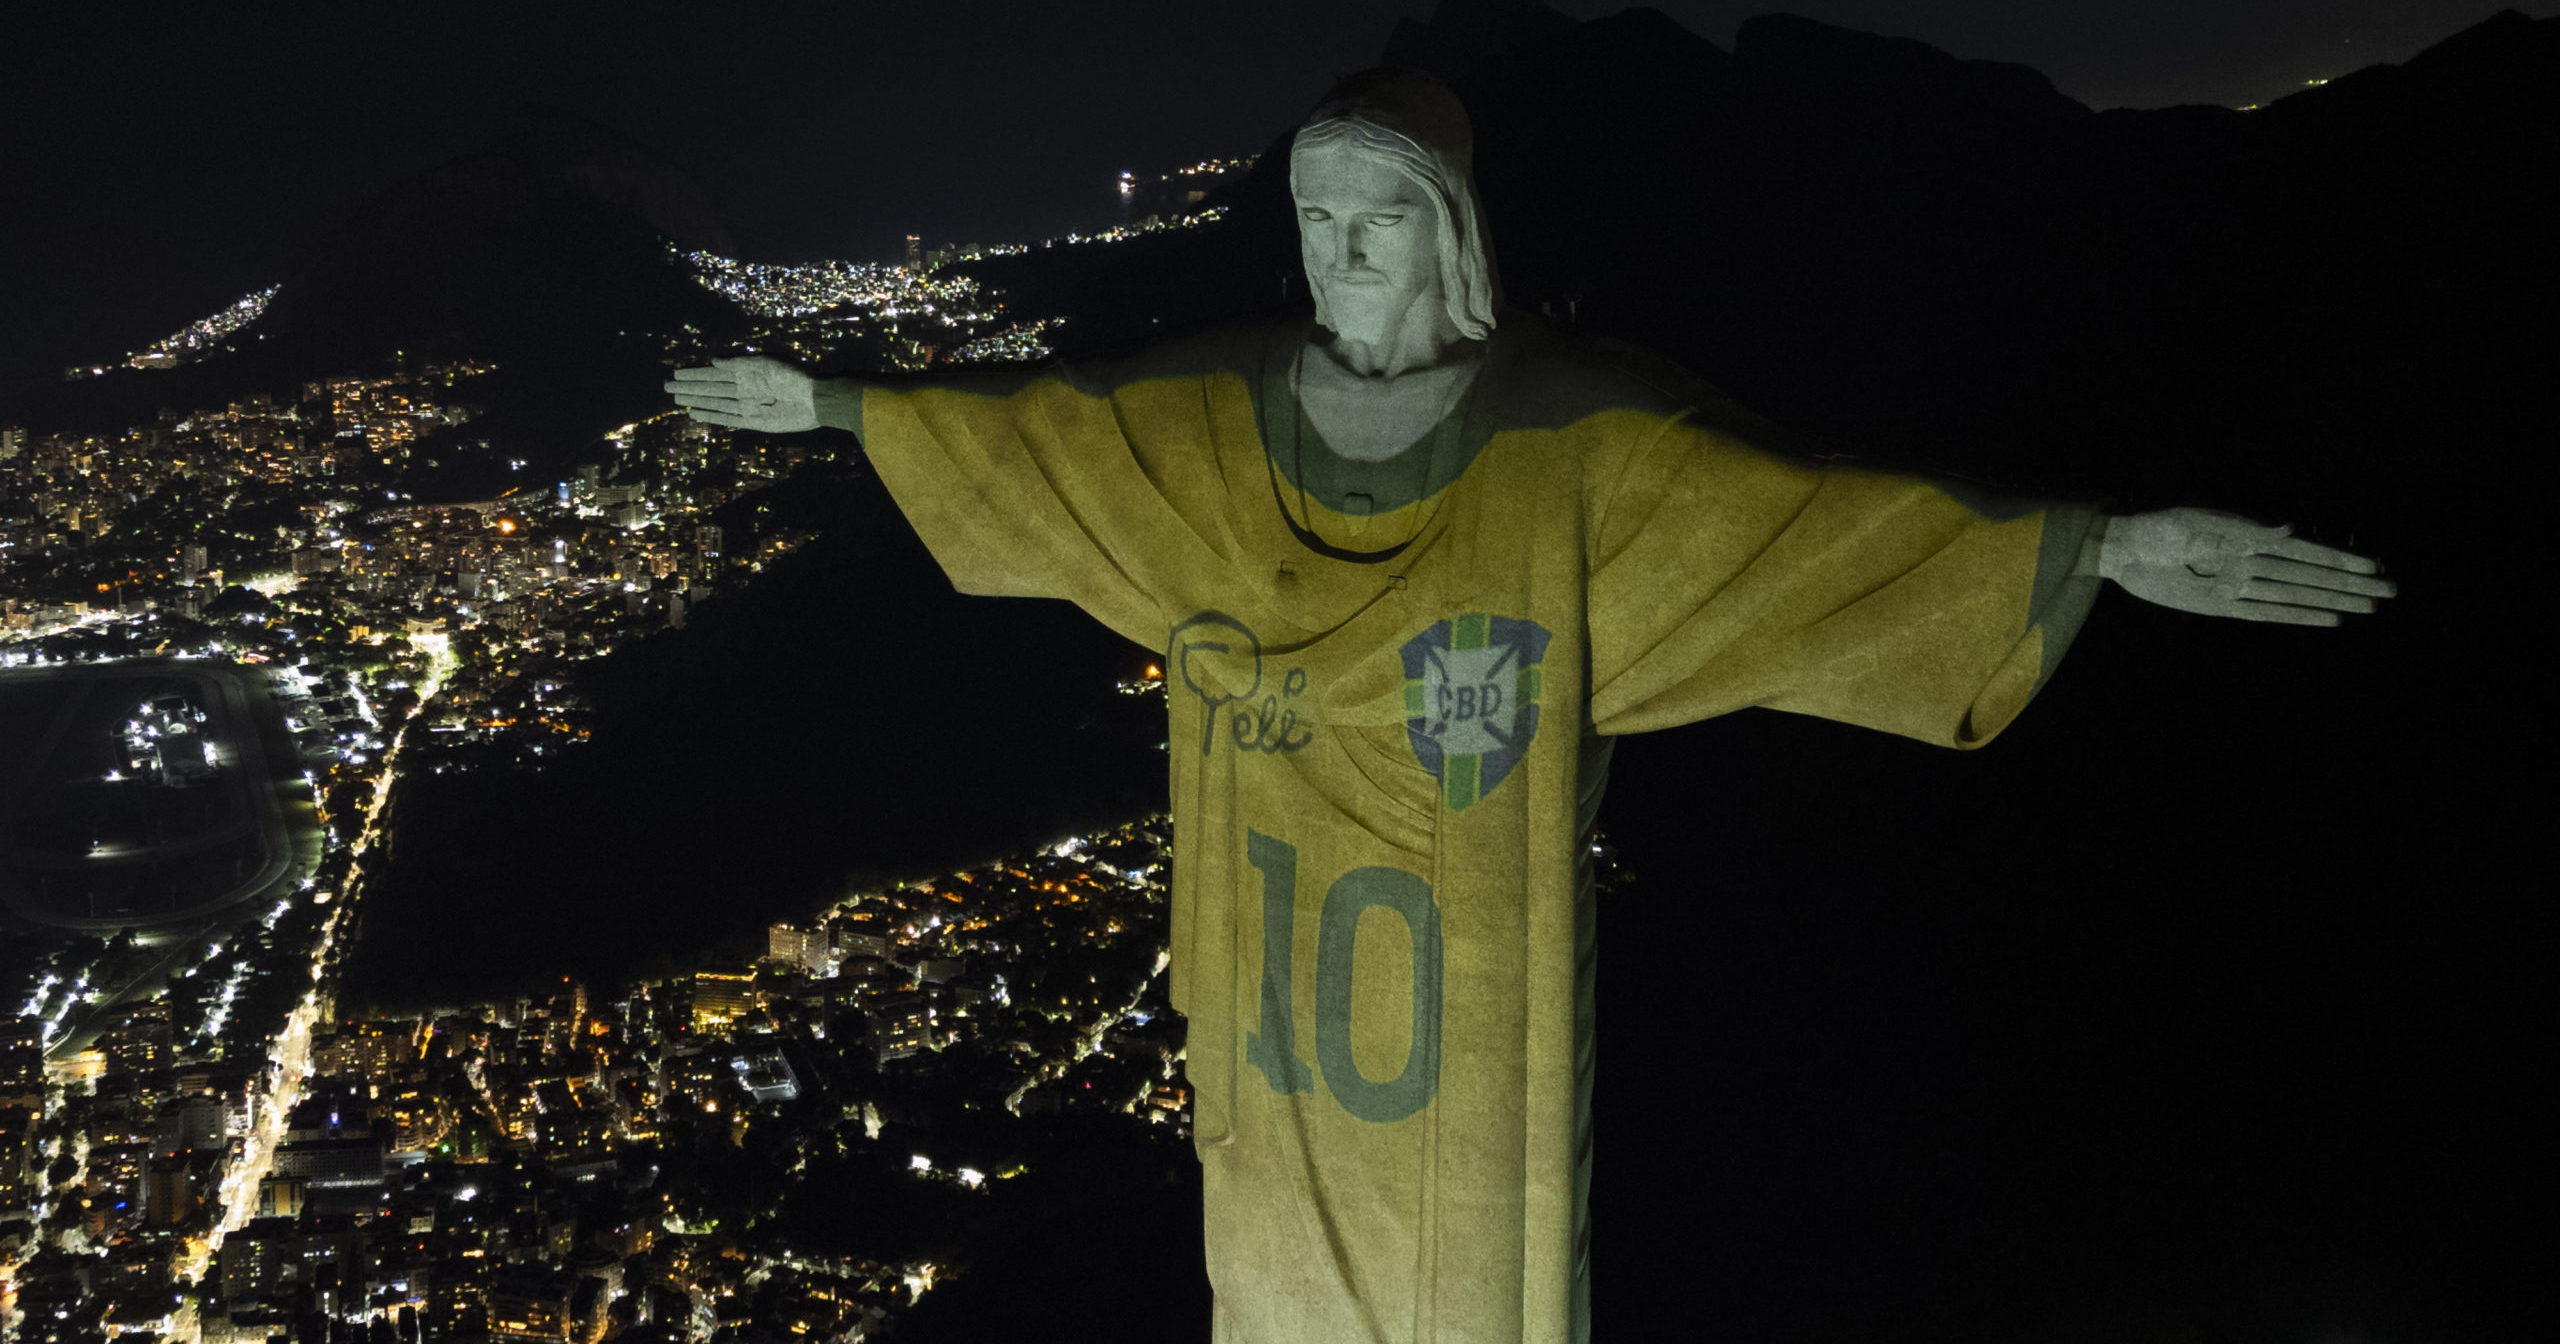 The Christ the Redeemer statue is illuminated with an image of Pele's Brazilian jersey in Rio de Janeiro, Brazil, on Friday.